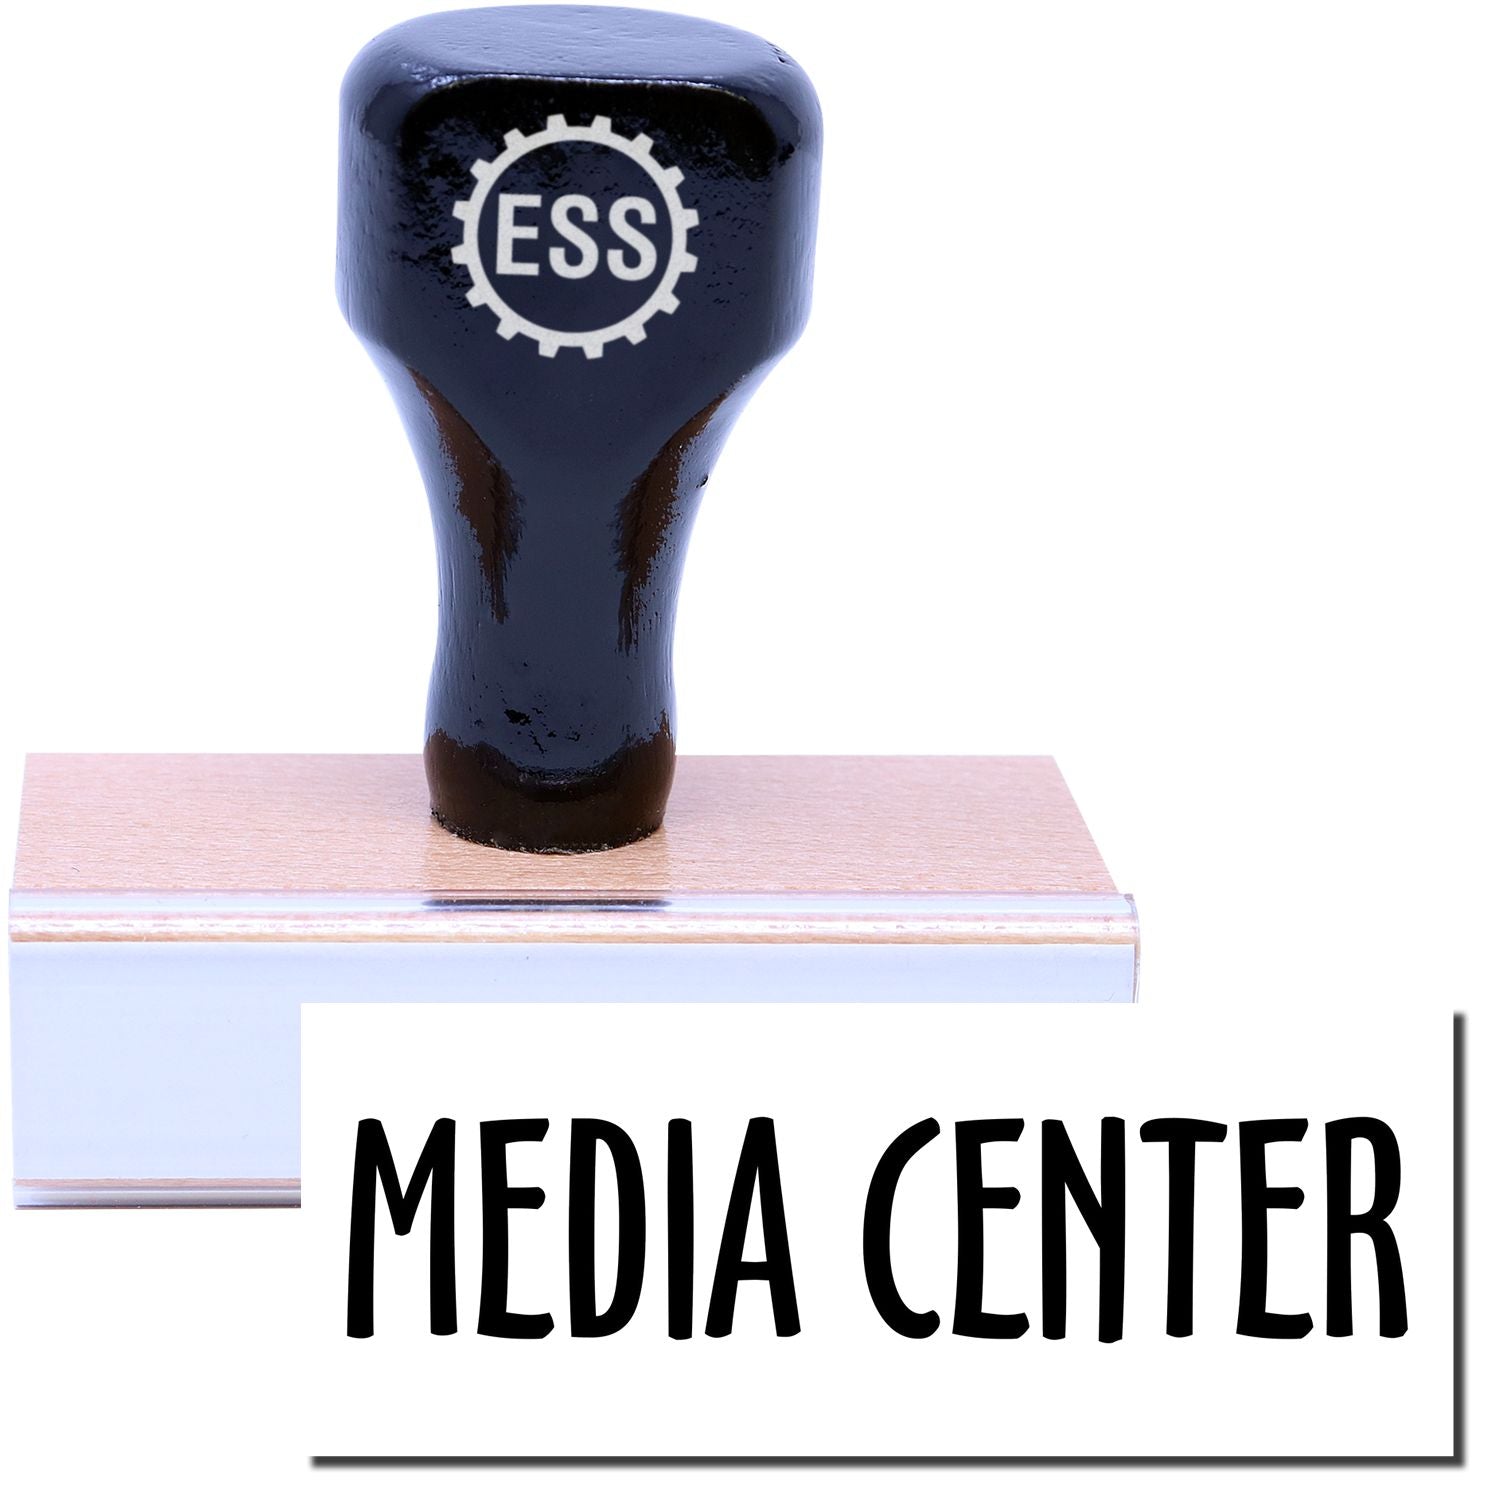 A stock office rubber stamp with a stamped image showing how the text "MEDIA CENTER" is displayed after stamping.